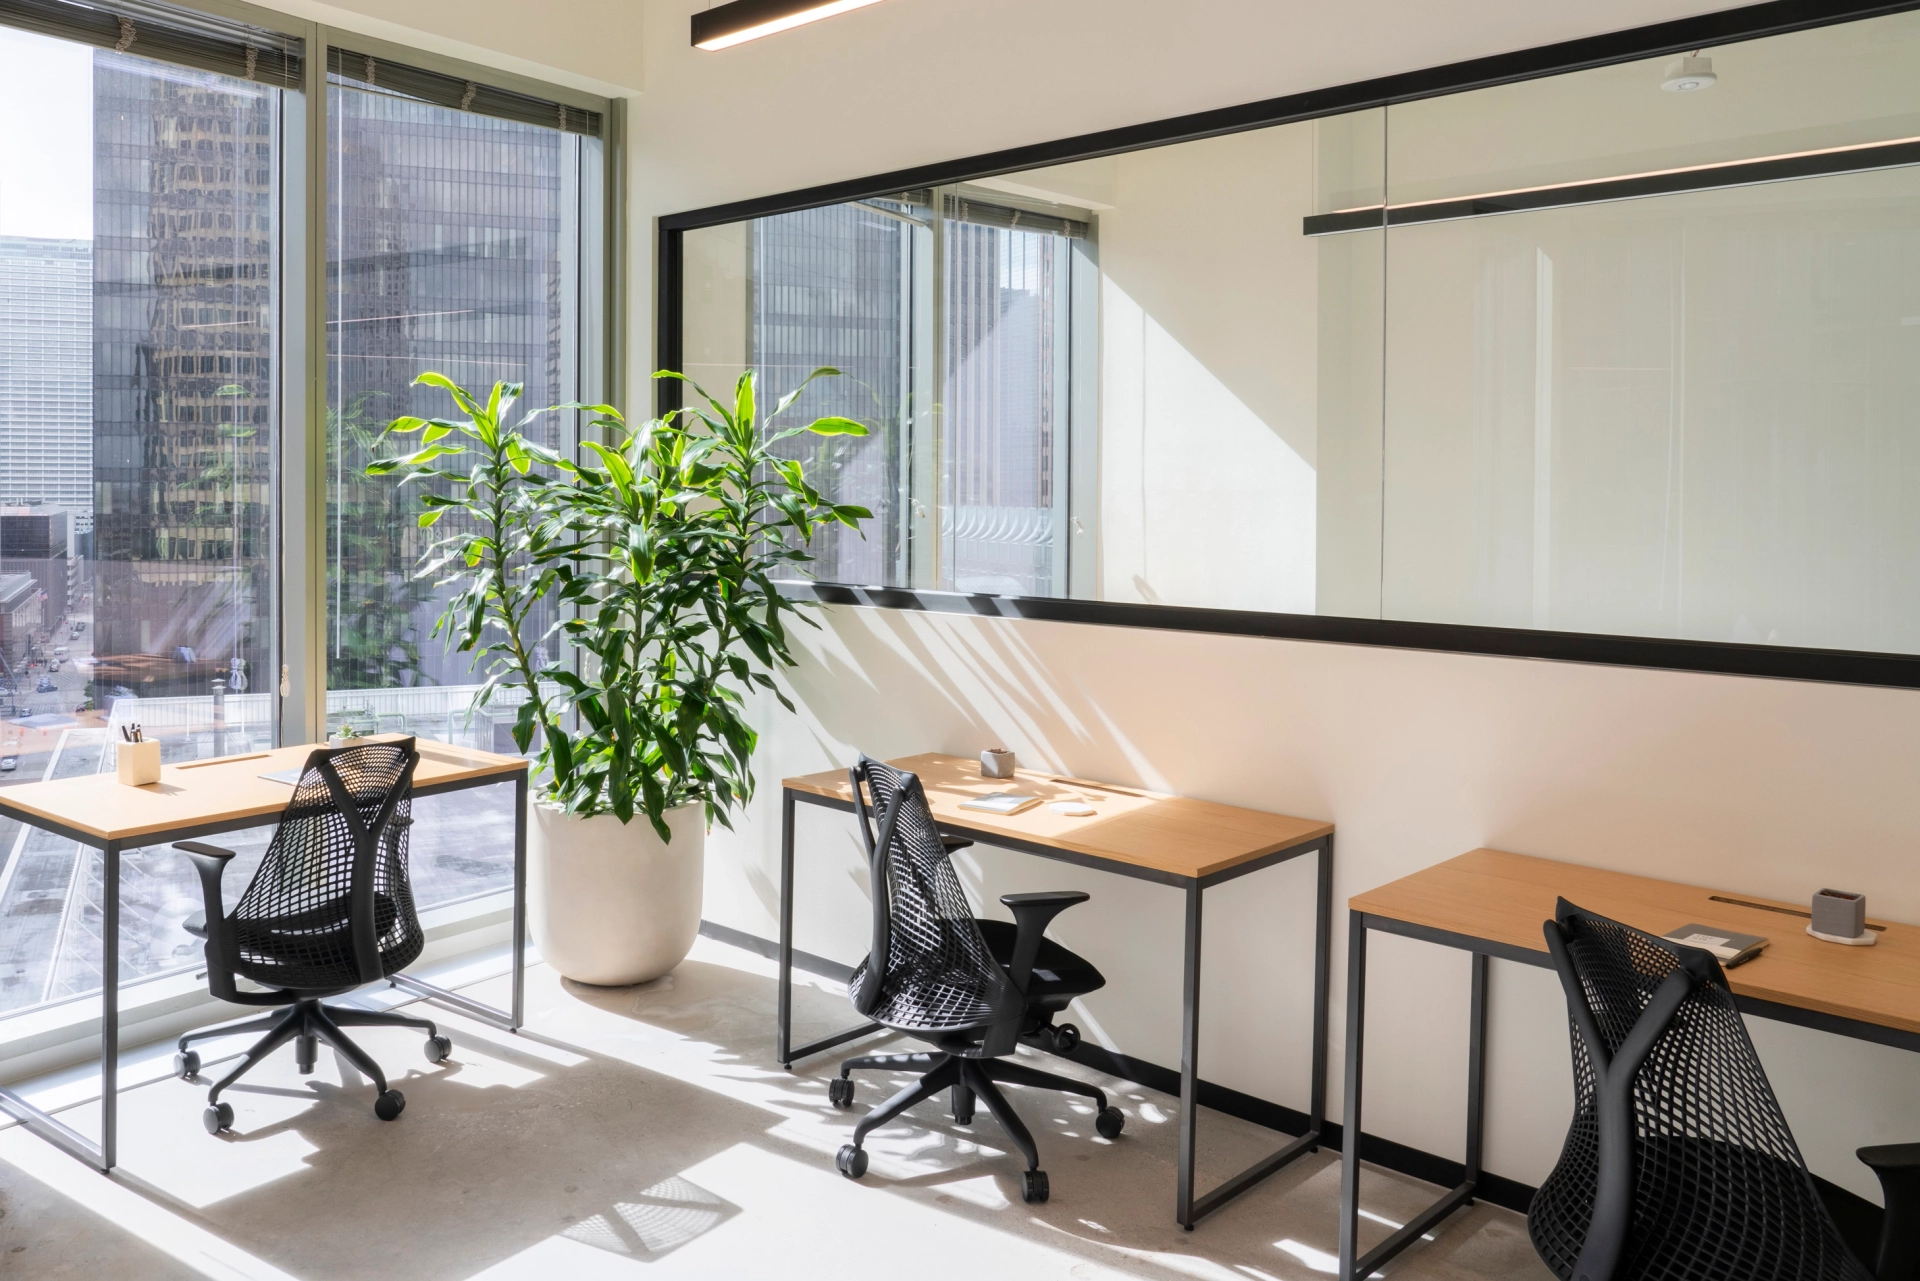 A workspace in an office featuring two desks, chairs, and a plant.